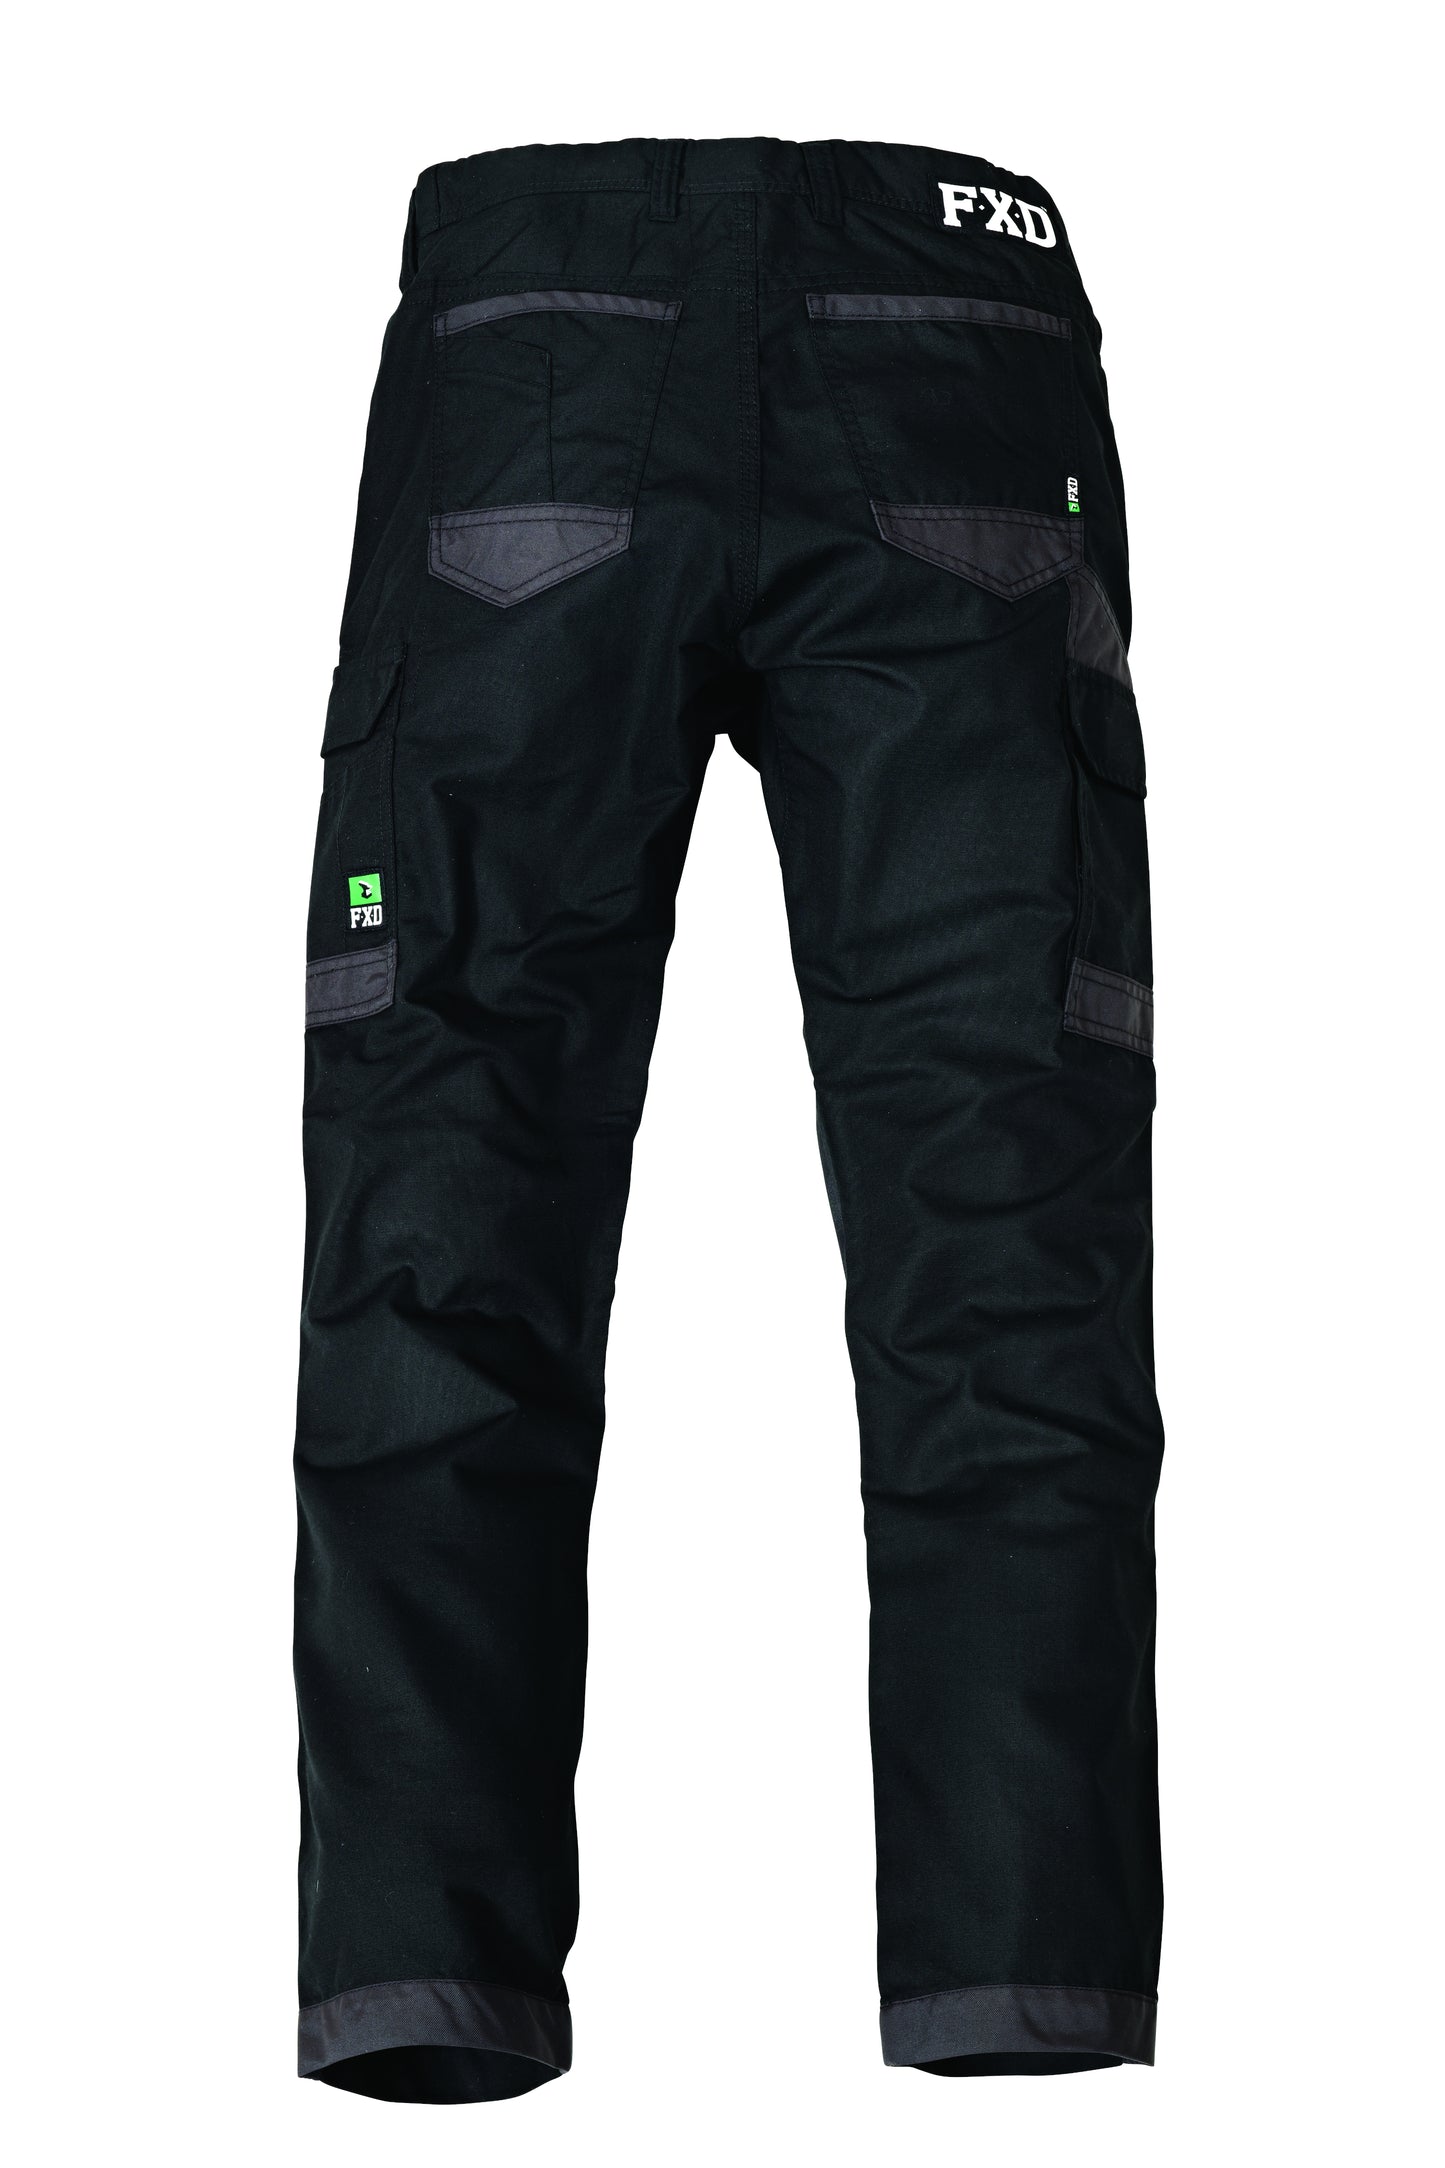 FXD WP-5 NEW LIGHT WEIGHT PANTS